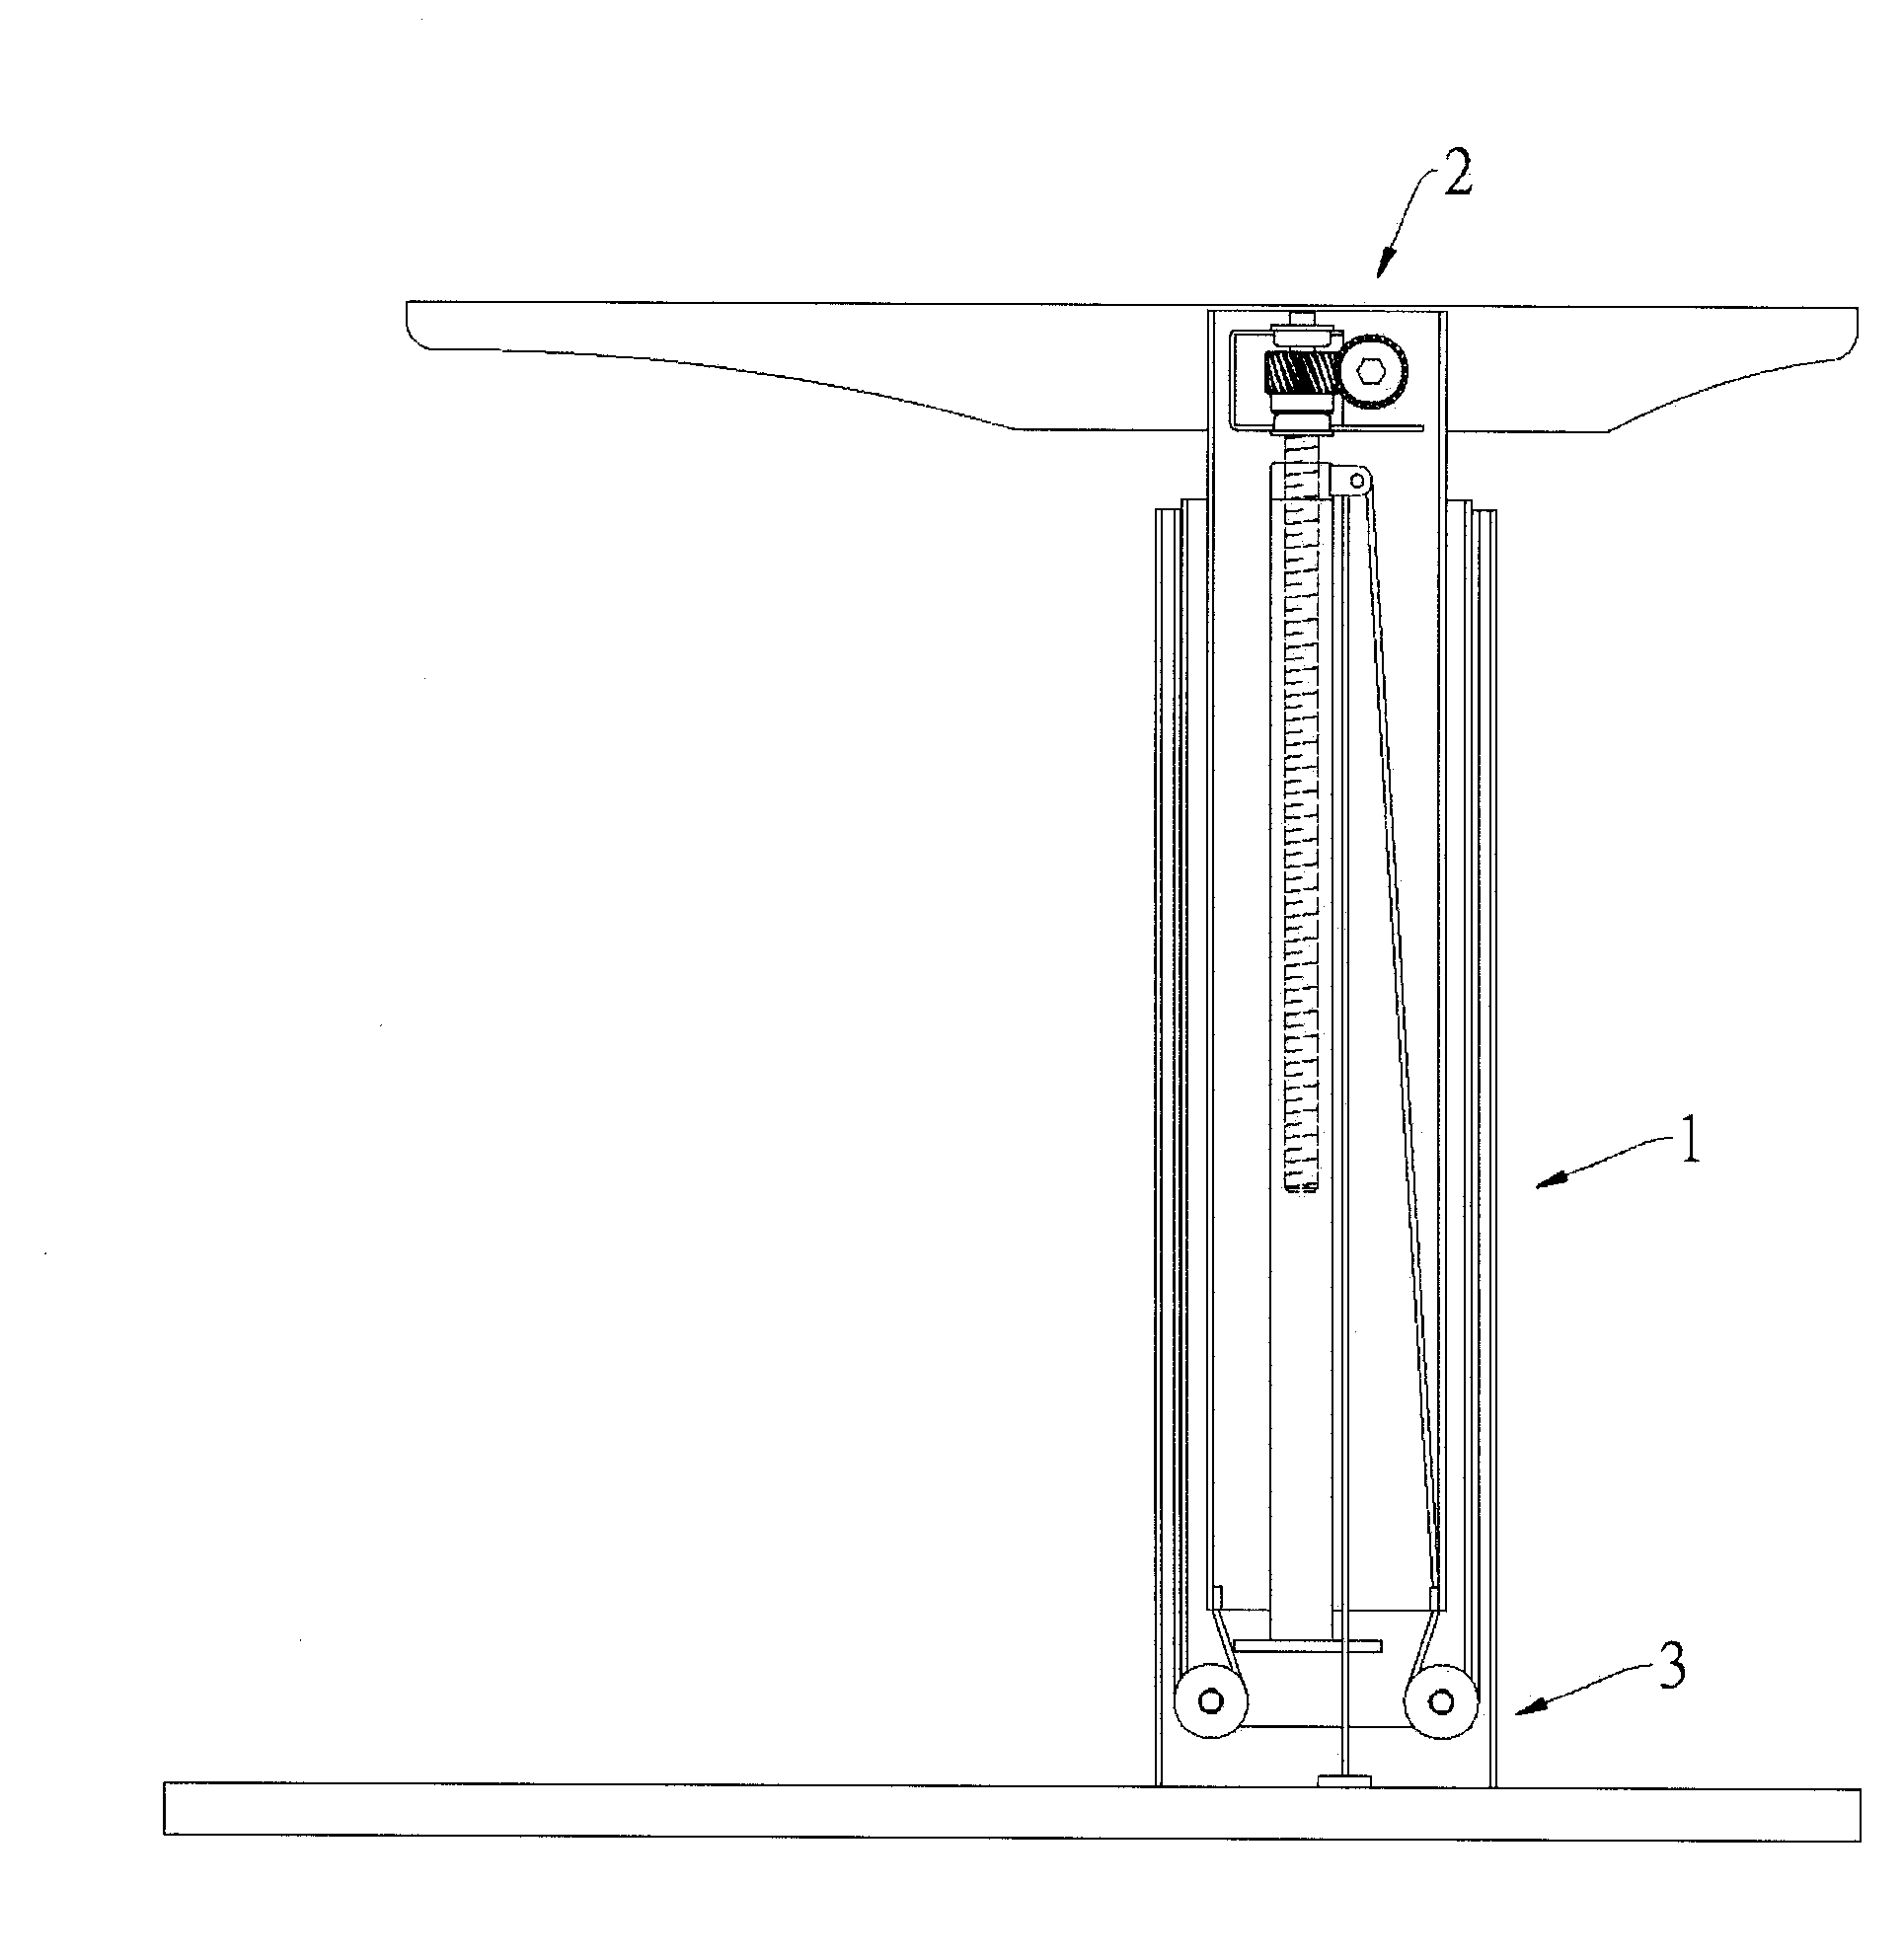 Adjustable support device